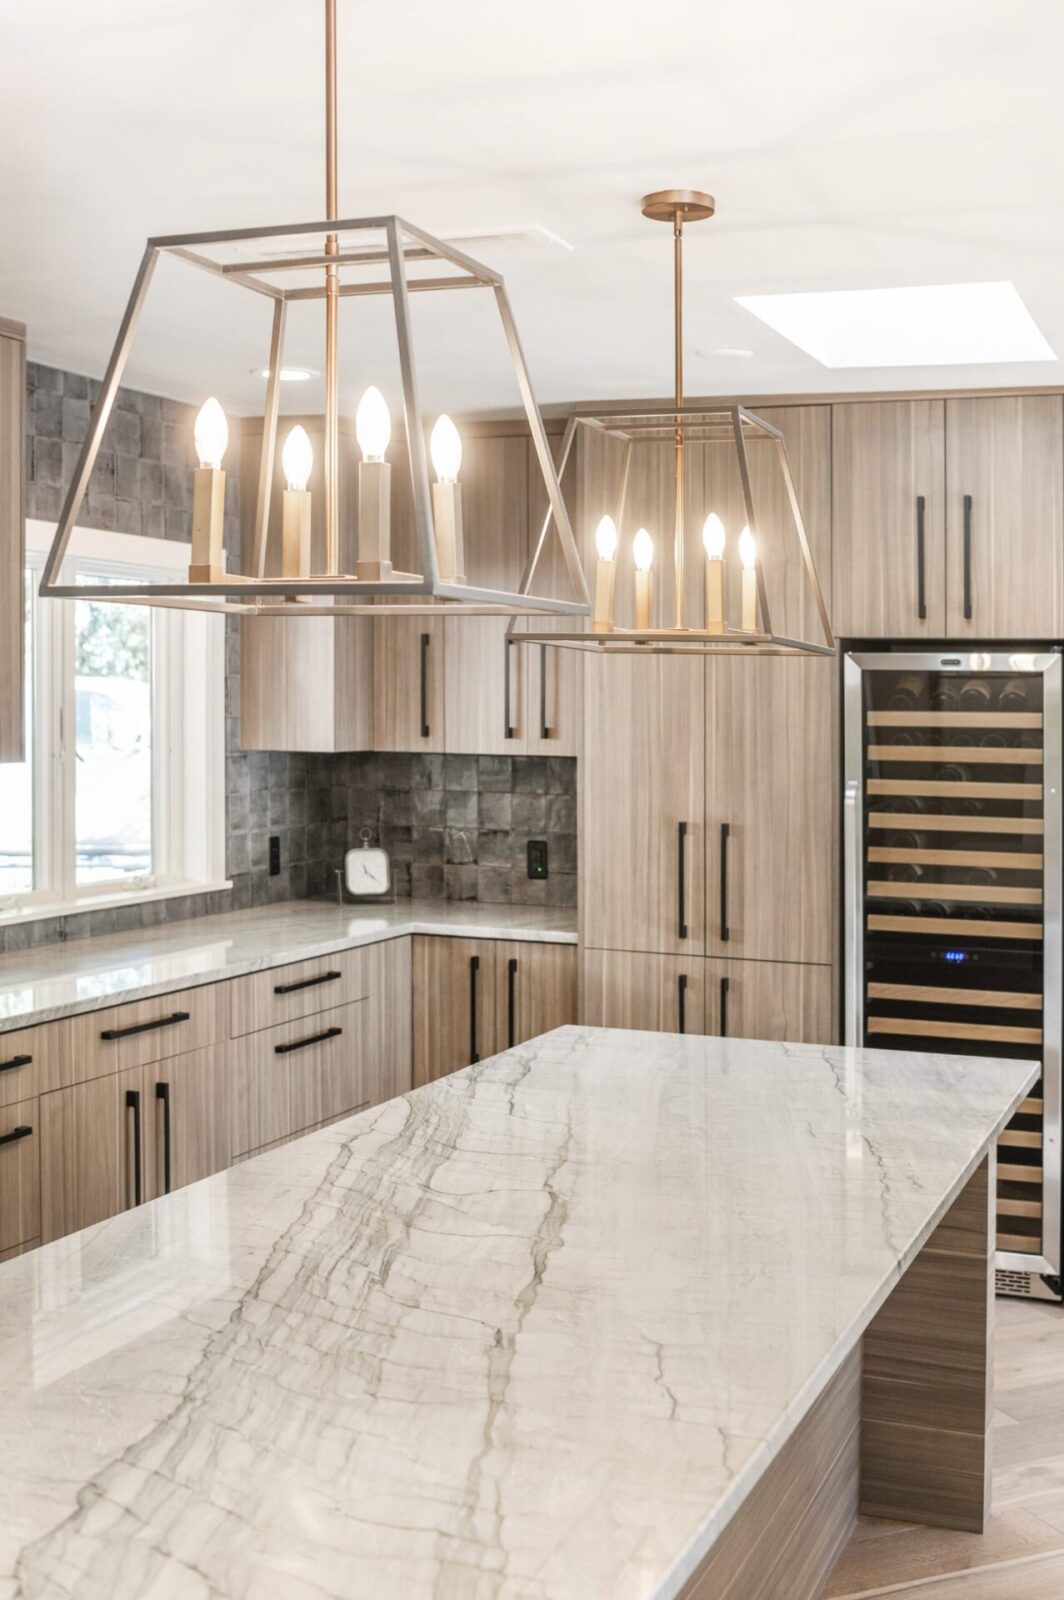 Custom kitchen cabinet doors in a contemporary Salt Lake City home